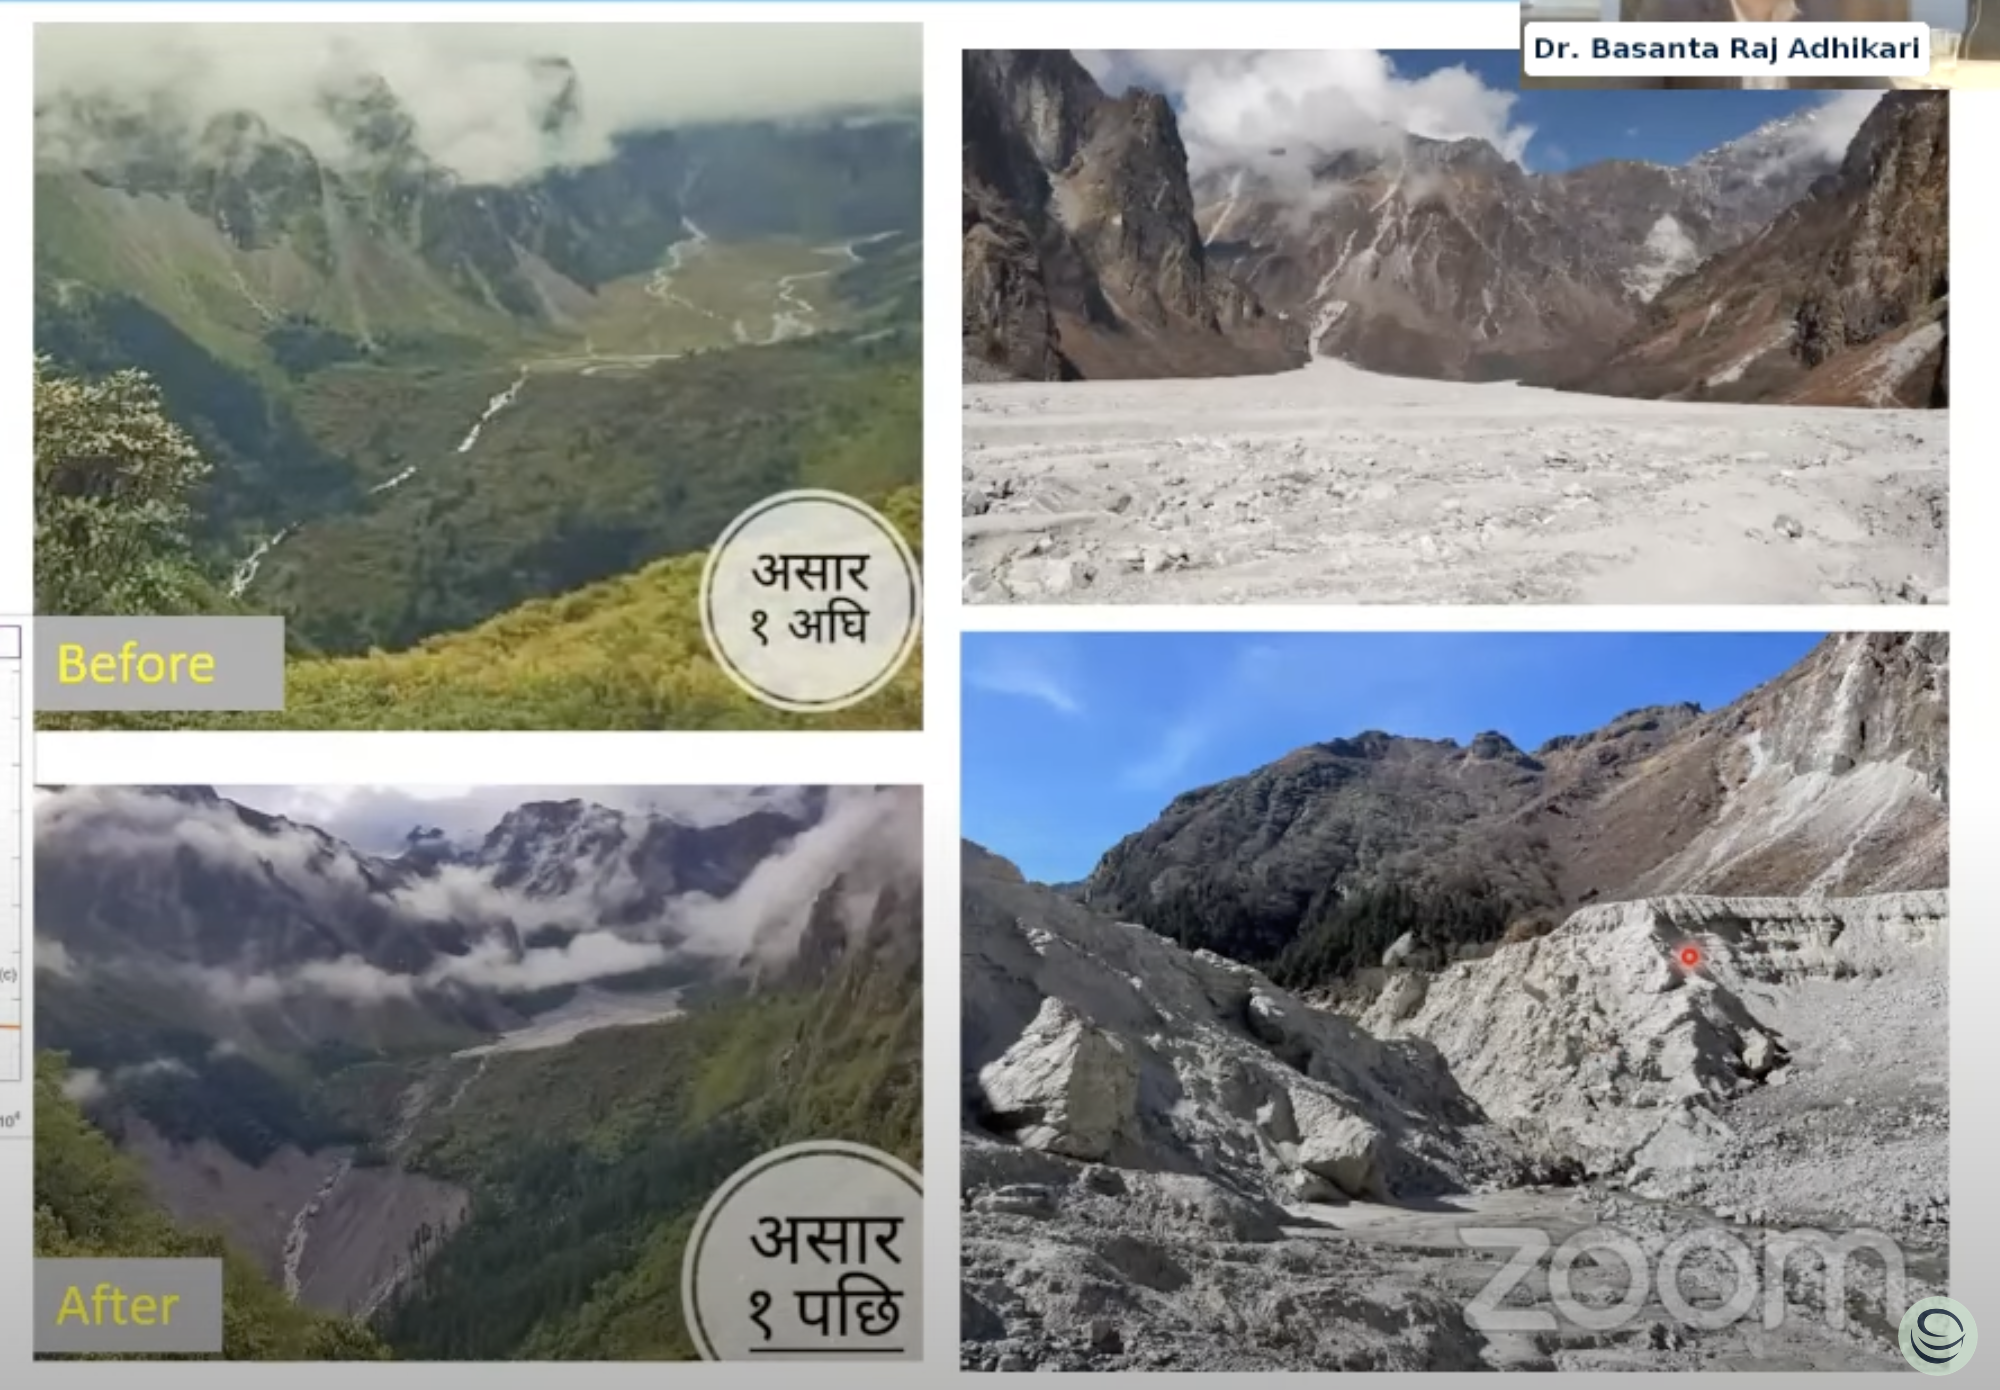 Basanta Raj Adhikari, Ph.D., describes the geographical impact with these pictures of a 2021 climate disaster in Melamchi.